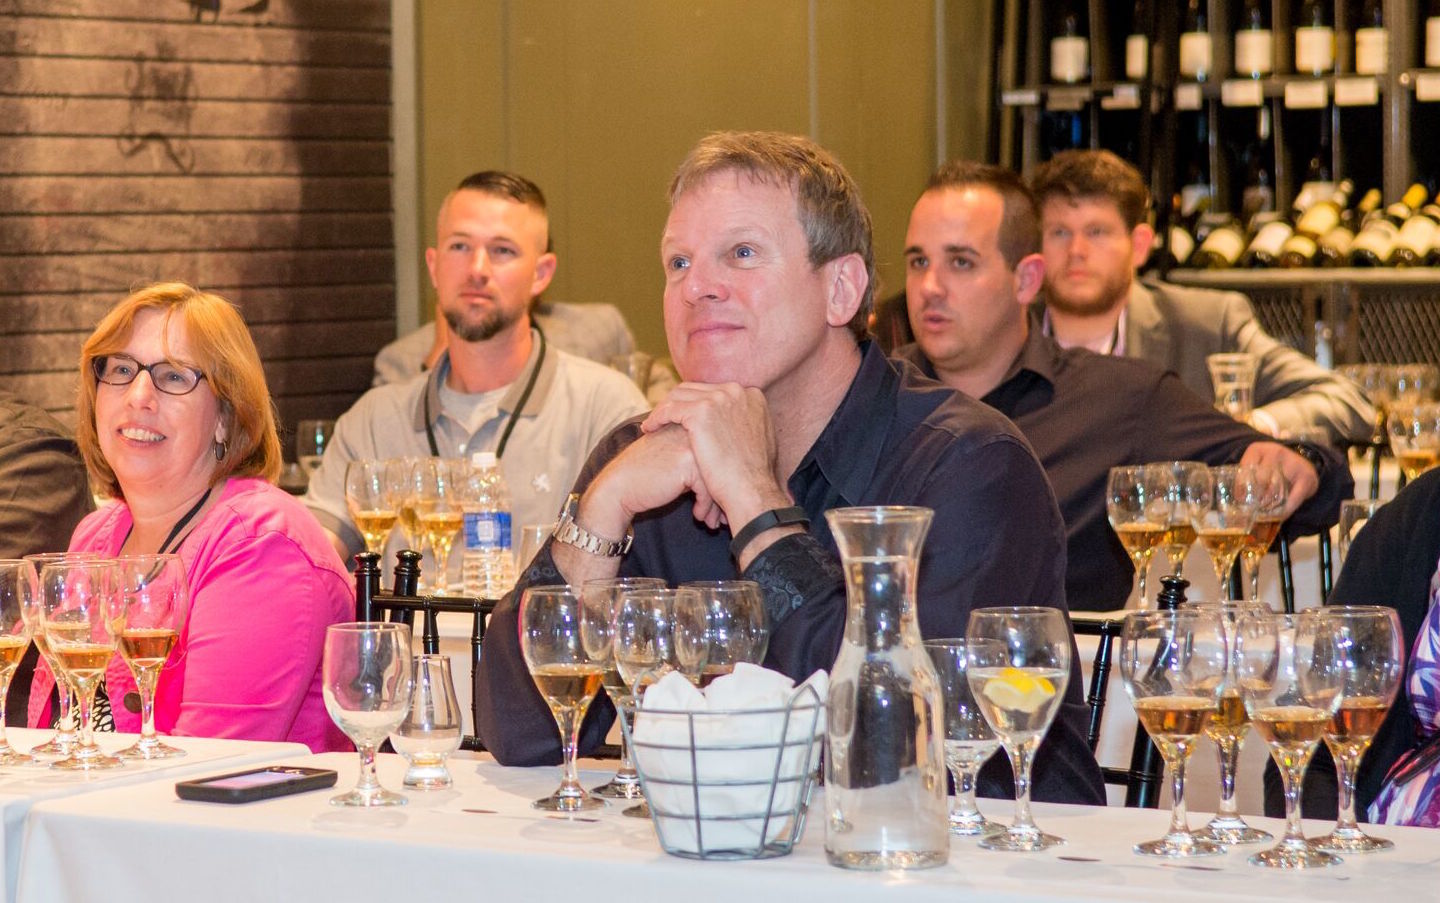 Several tastings and master classes give new whiskey drinkers the chance to understand the beverage more. Courtesy photo